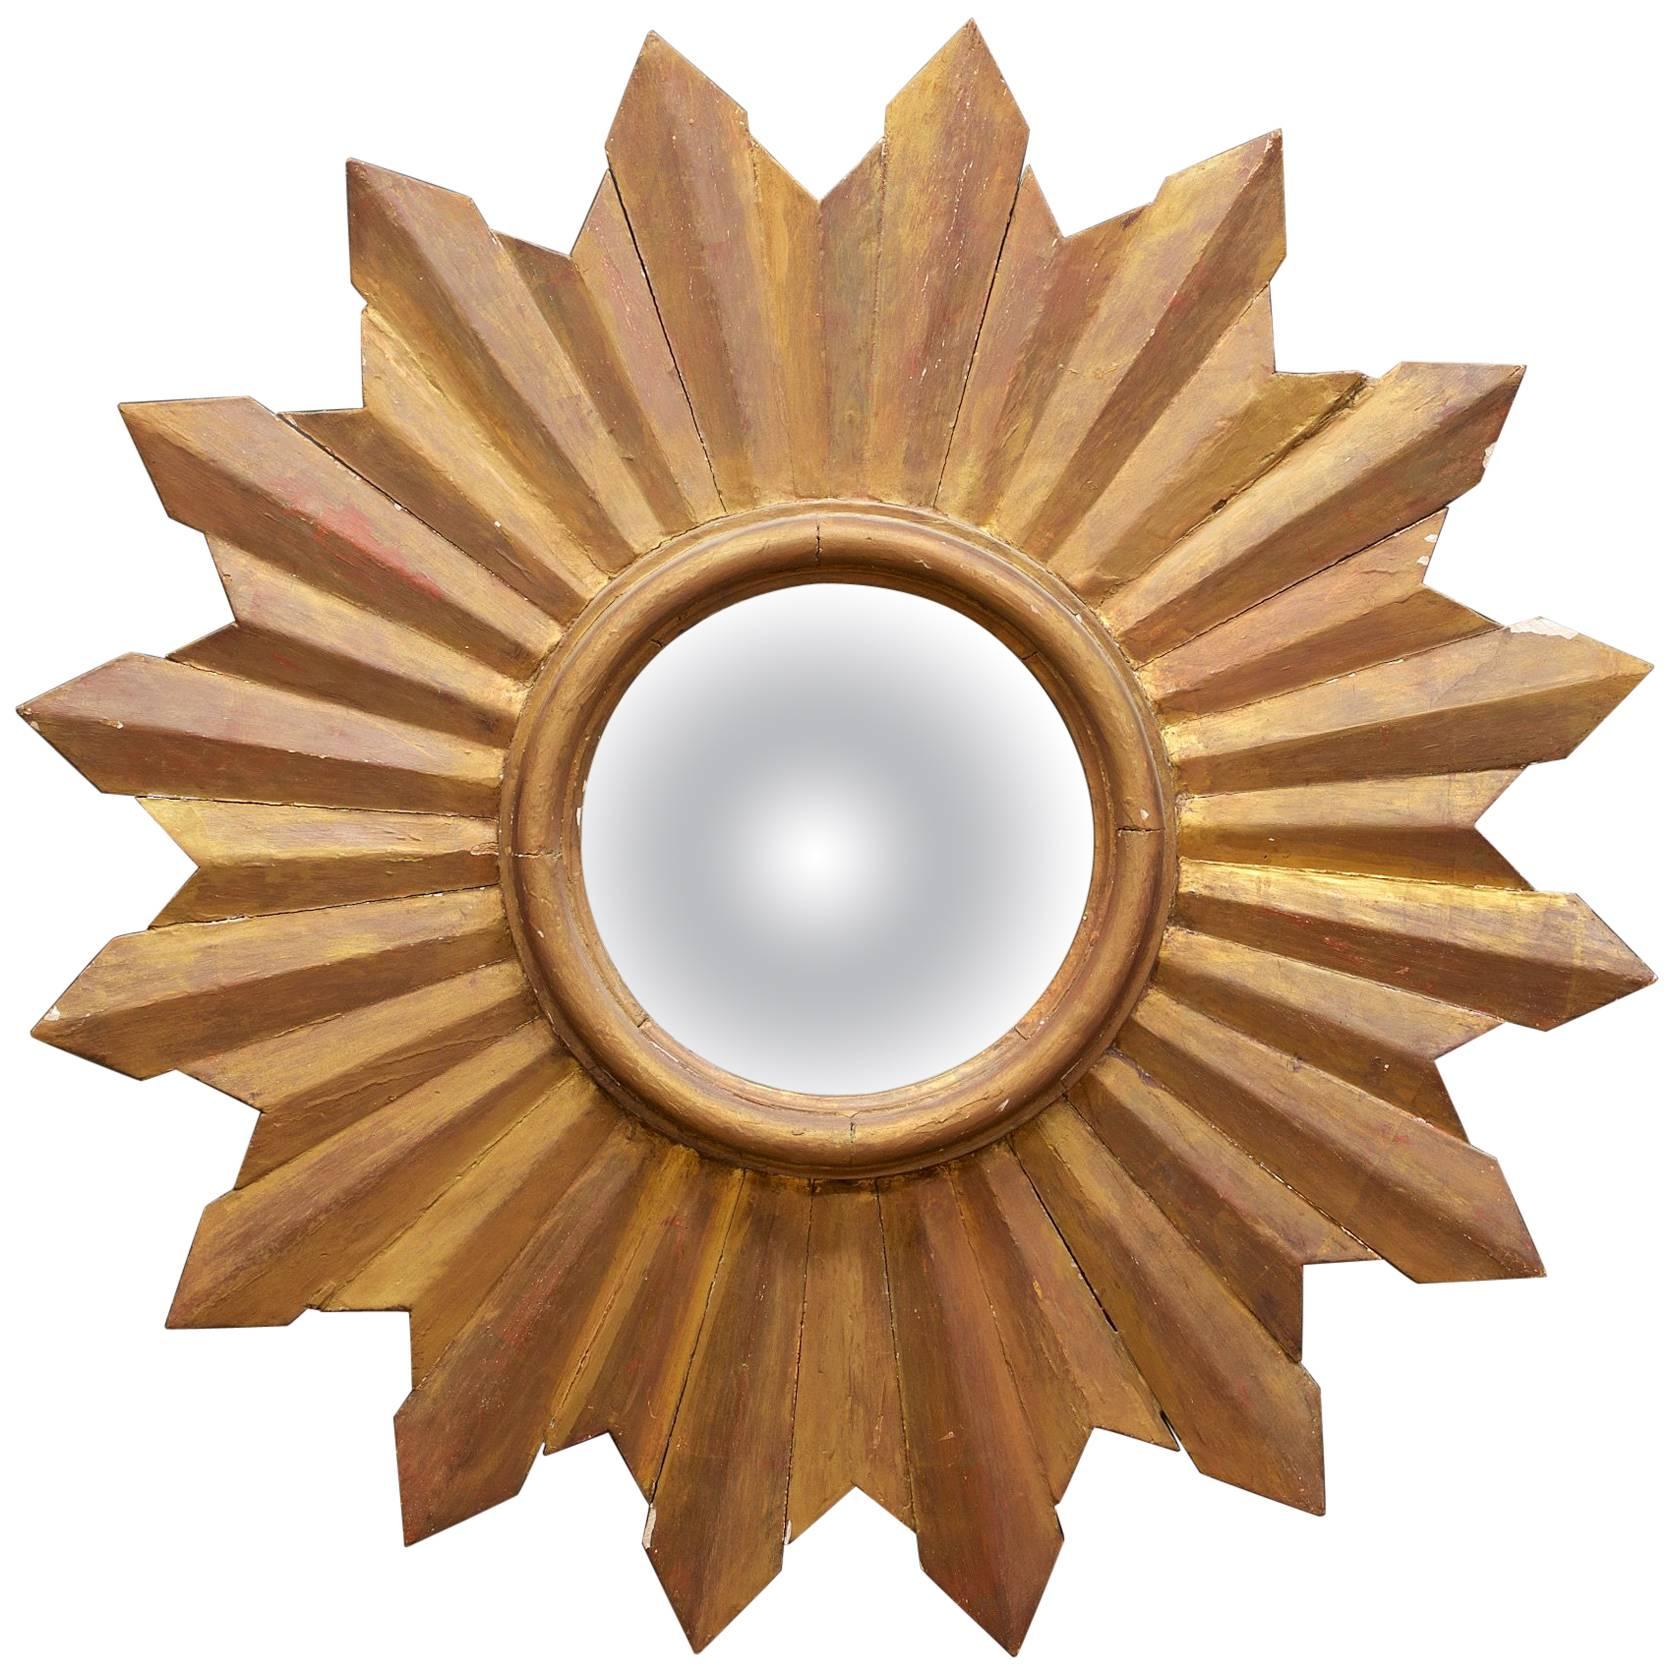 Rustic Wooden Starburst Convex Wall Mirror Patina Hollywood Glam Mid-Century